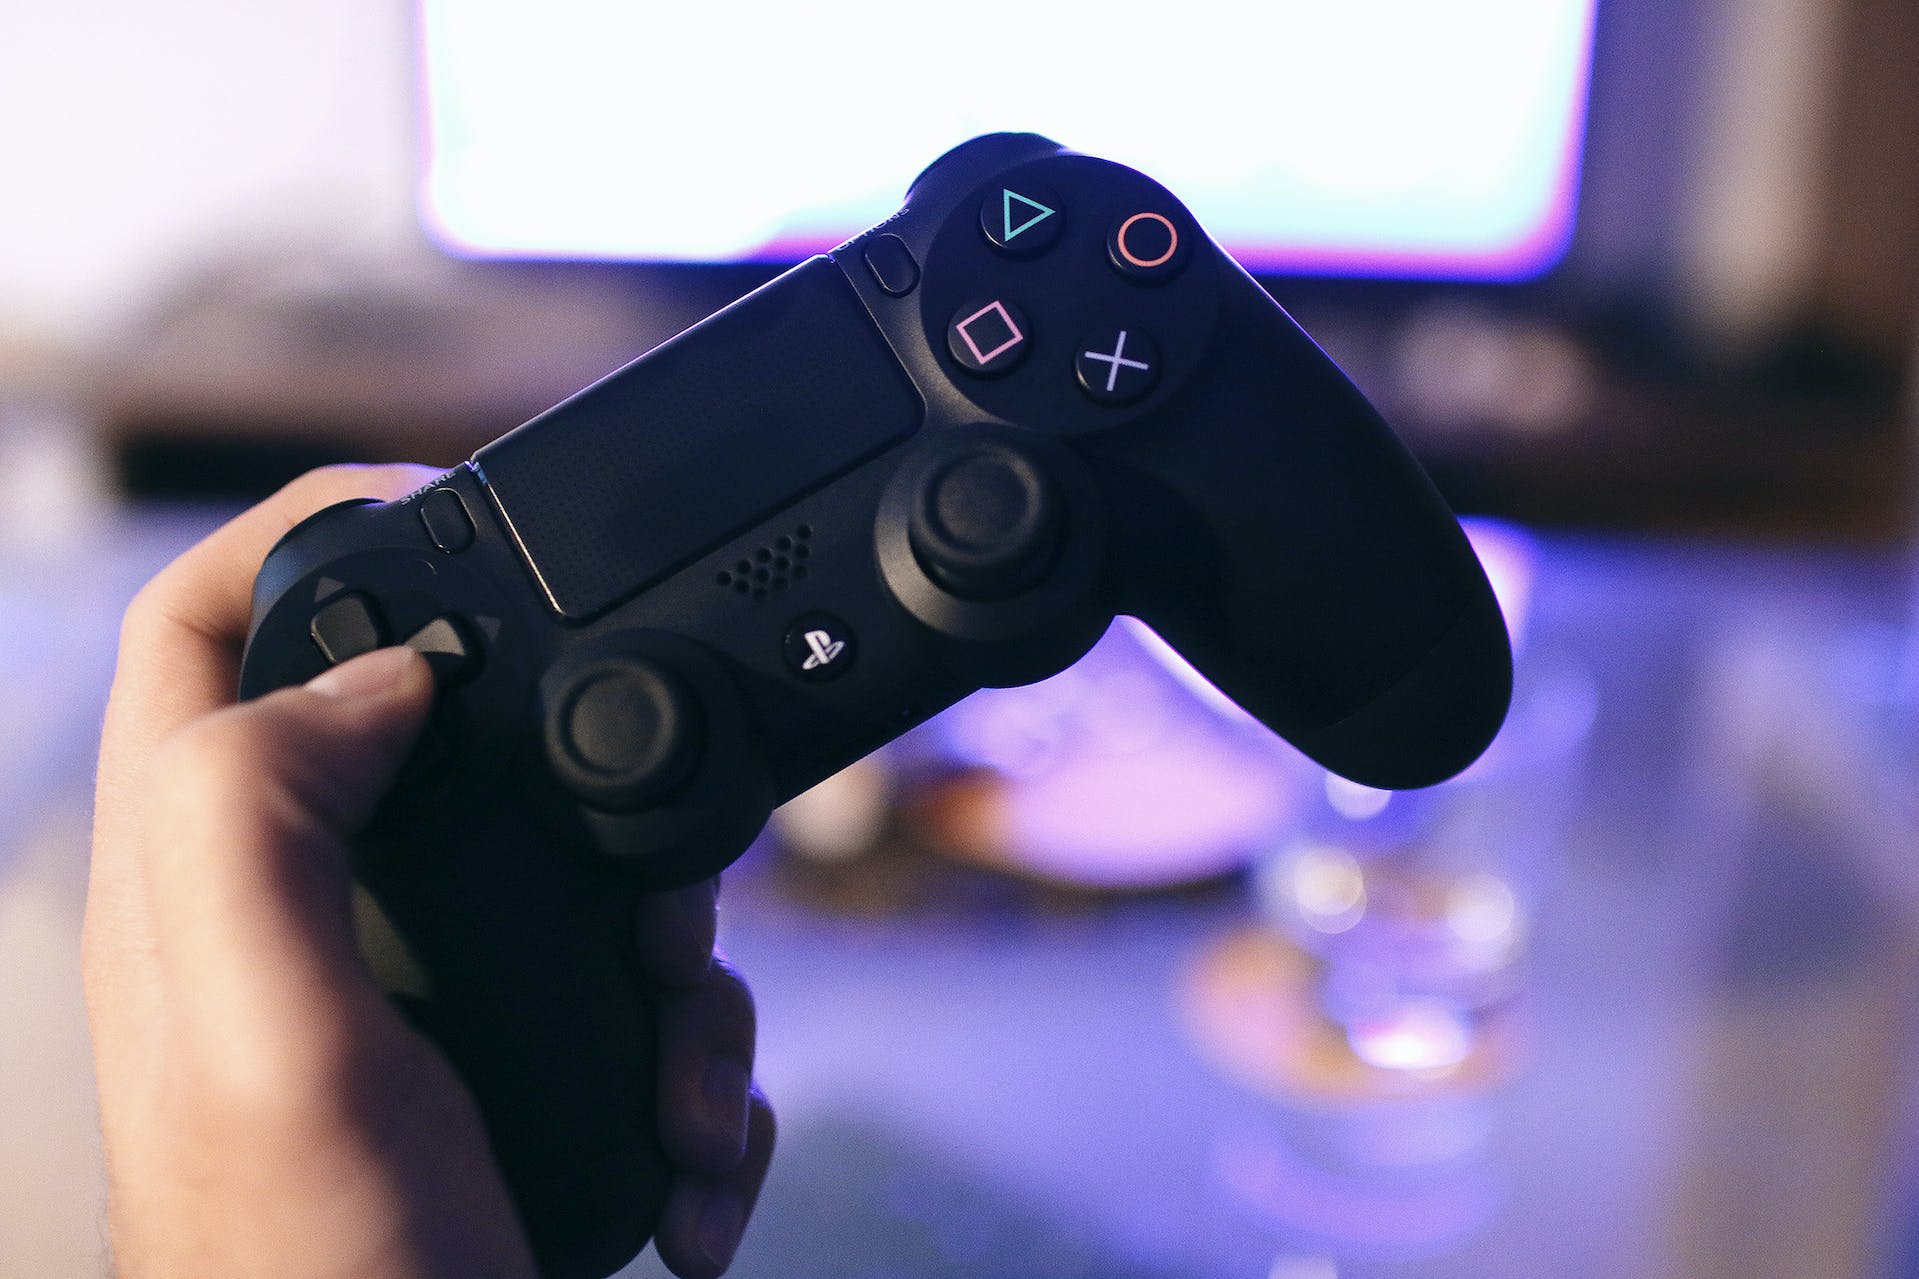 A person holding a controller | Source: Pexels